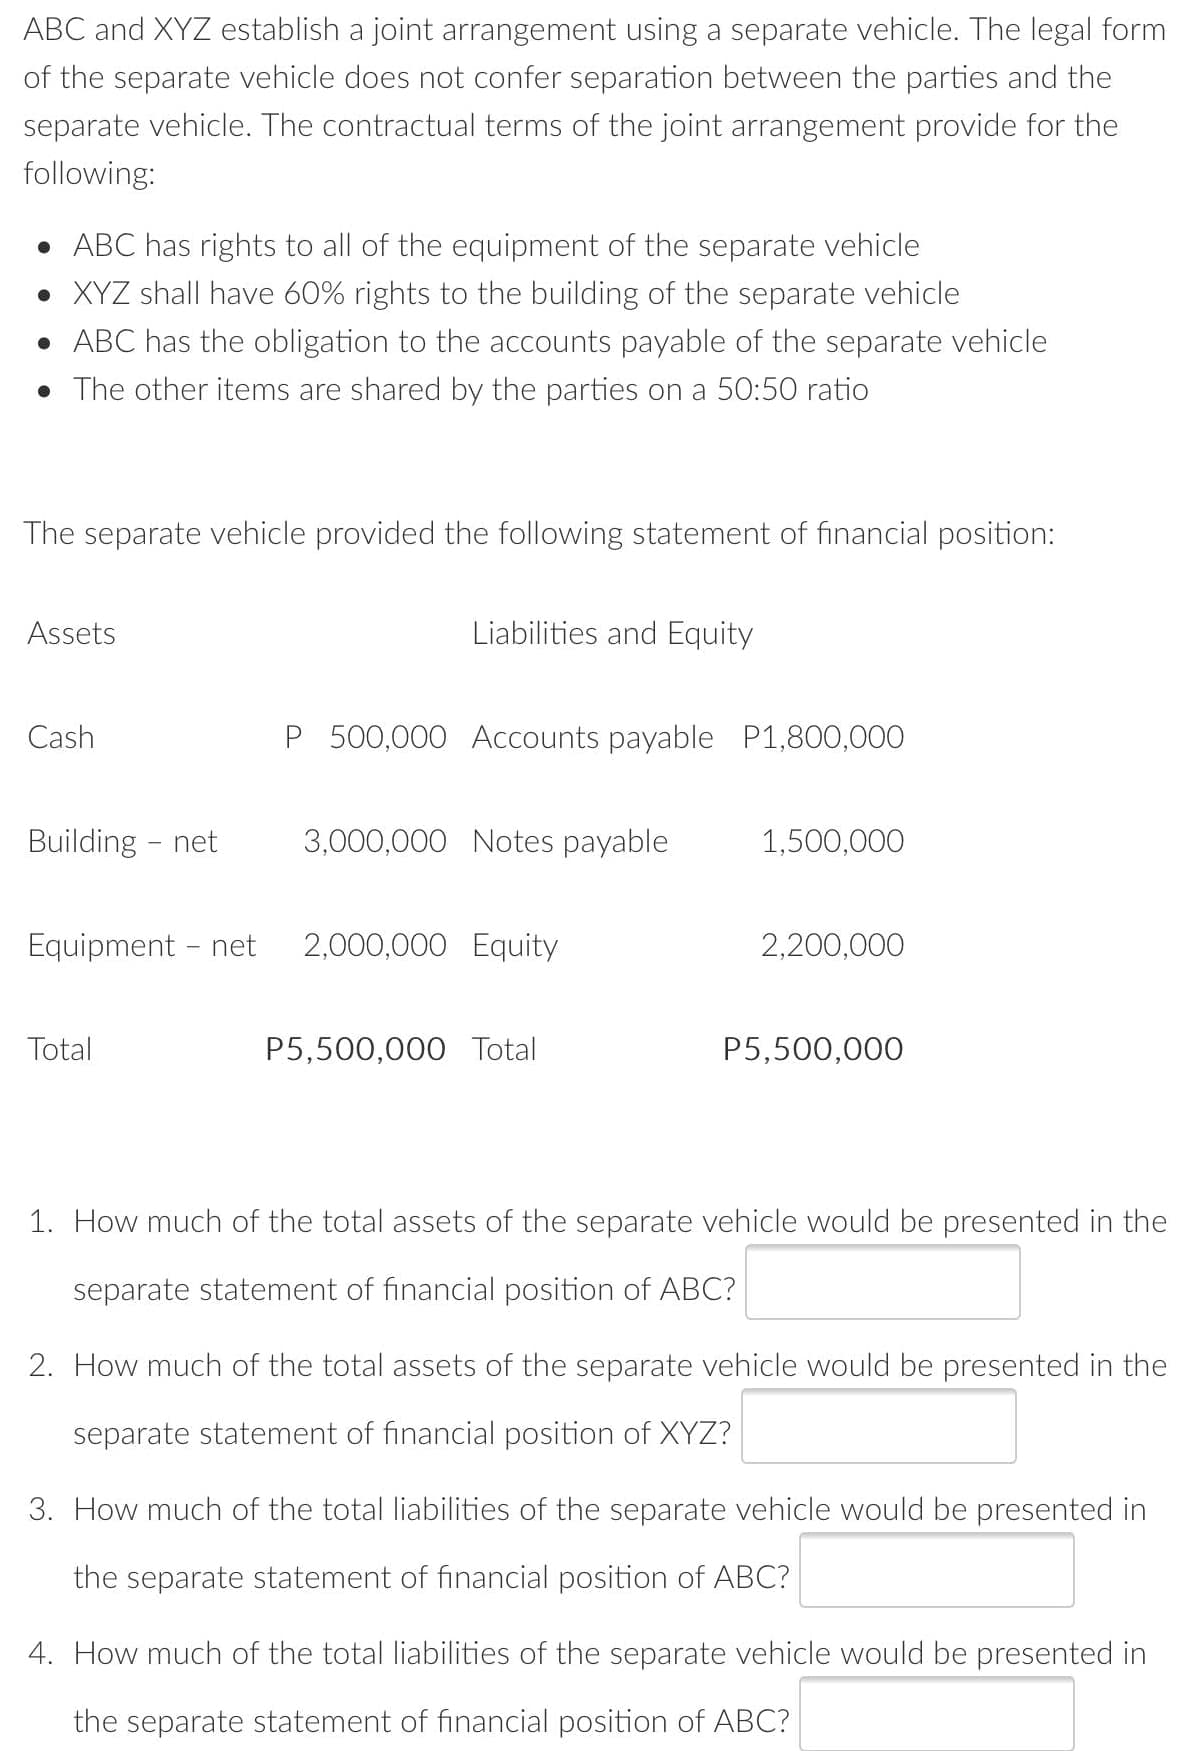 ABC and XYZ establish a joint arrangement using a separate vehicle. The legal form
of the separate vehicle does not confer separation between the parties and the
separate vehicle. The contractual terms of the joint arrangement provide for the
following:
• ABC has rights to all of the equipment of the separate vehicle
• XYZ shall have 60% rights to the building of the separate vehicle
• ABC has the obligation to the accounts payable of the separate vehicle
• The other items are shared by the parties on a 50:50 ratio
The separate vehicle provided the following statement of financial position:
Assets
Liabilities and Equity
Cash
P 500,000 ACcounts payable P1,800,000
Building - net
3,000,000 Notes payable
1,500,000
Equipment - net
2,000,000 Equity
2,200,000
Total
P5,500,000 Total
P5,500,000
1. How much of the total assets of the separate vehicle would be presented in the
separate statement of financial position of ABC?
2. How much of the total assets of the separate vehicle would be presented in the
separate statement of financial position of XYZ?
3. How much of the total liabilities of the separate vehicle would be presented in
the separate statement of financial position of ABC?
4. How much of the total liabilities of the separate vehicle would be presented in
the separate statement of financial position of ABC?
